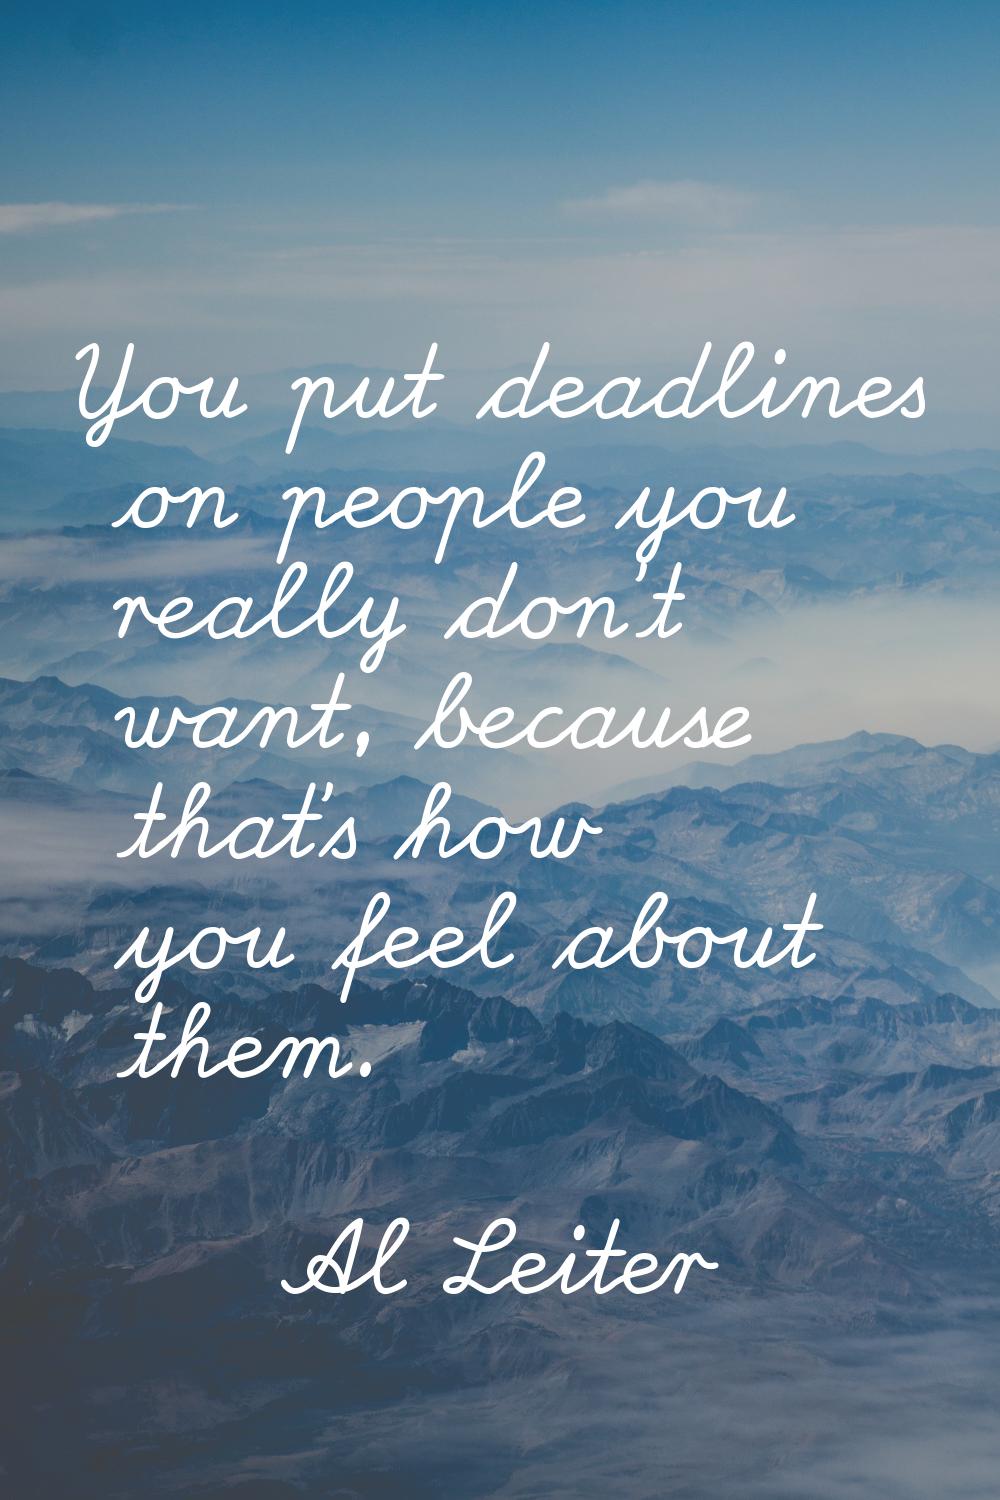 You put deadlines on people you really don't want, because that's how you feel about them.